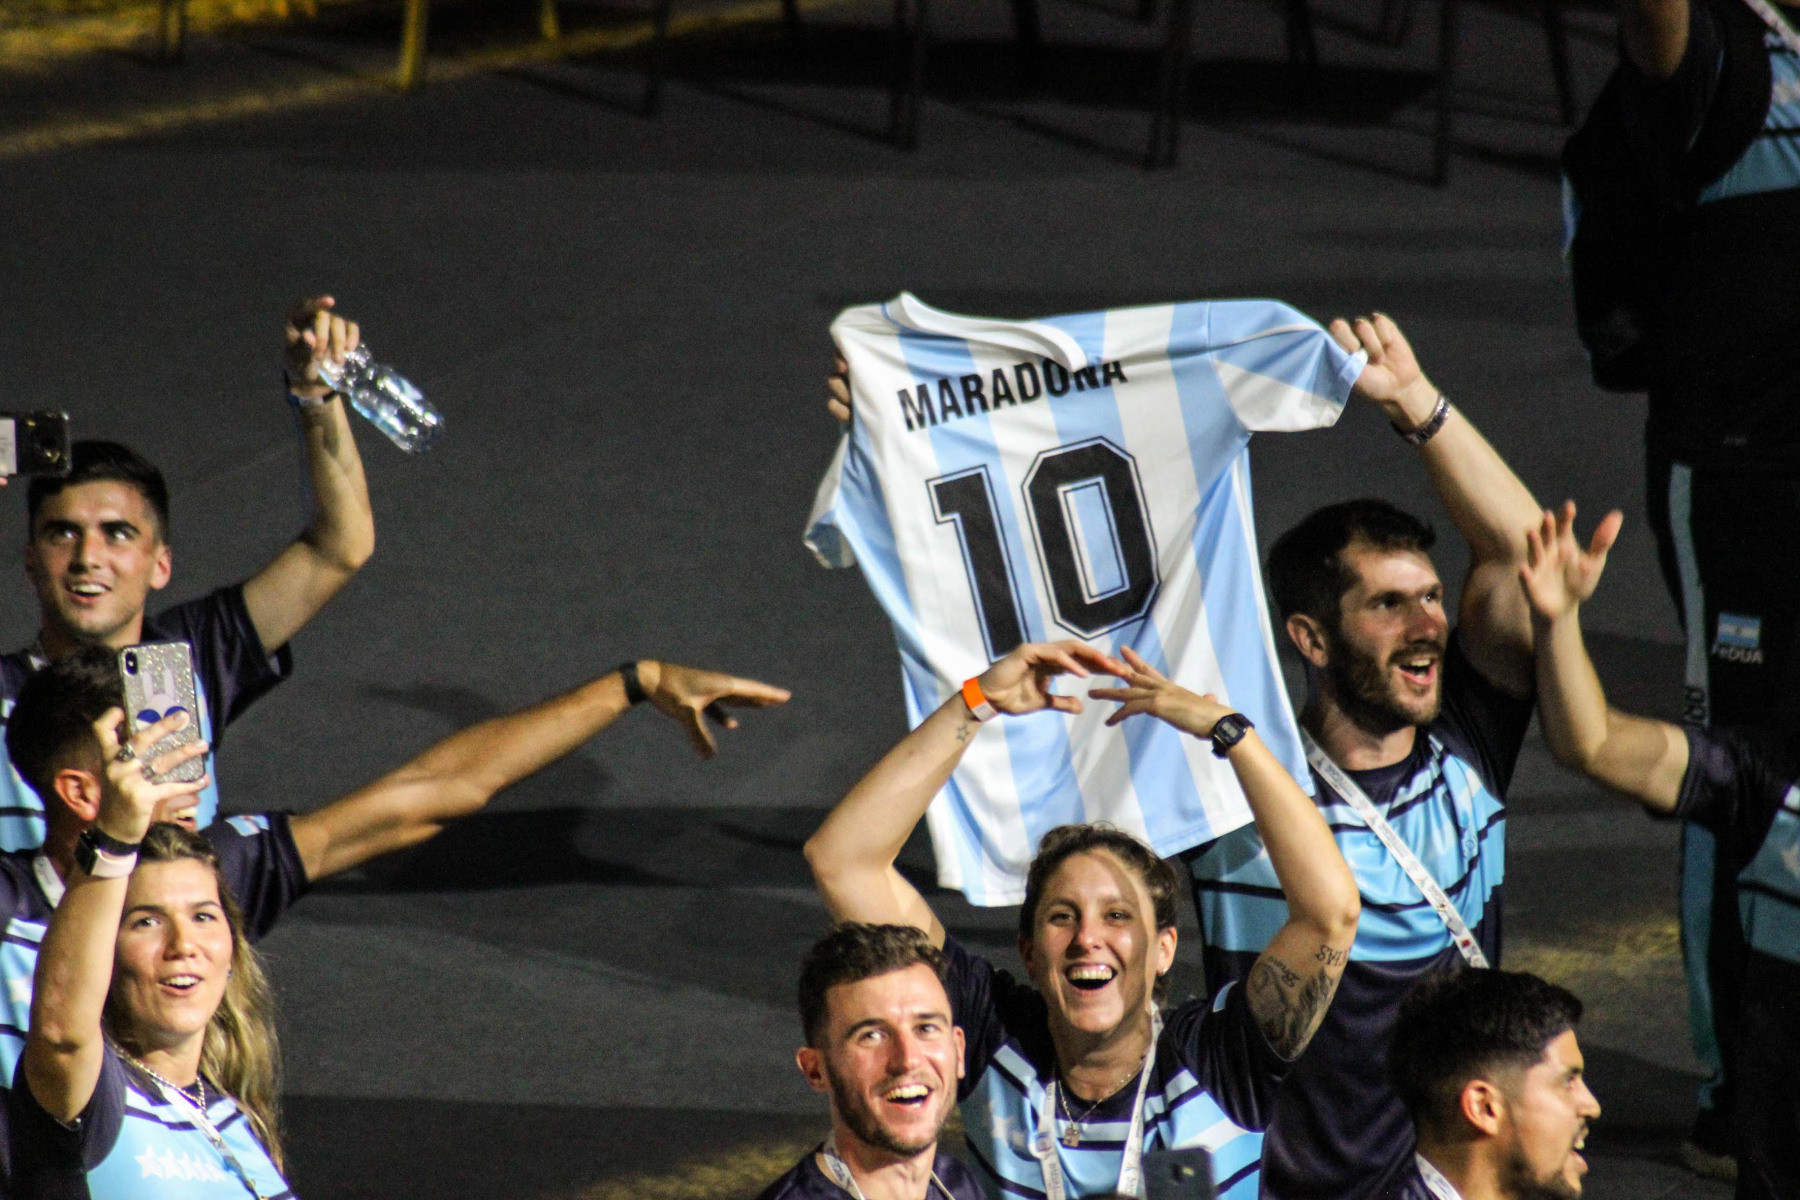 The crowd greeted Argentina with rapturous applause, owing to Diego Maradona's heroics in SSC Napoli's Serie A title triumph in 1987 ©Naples 2019